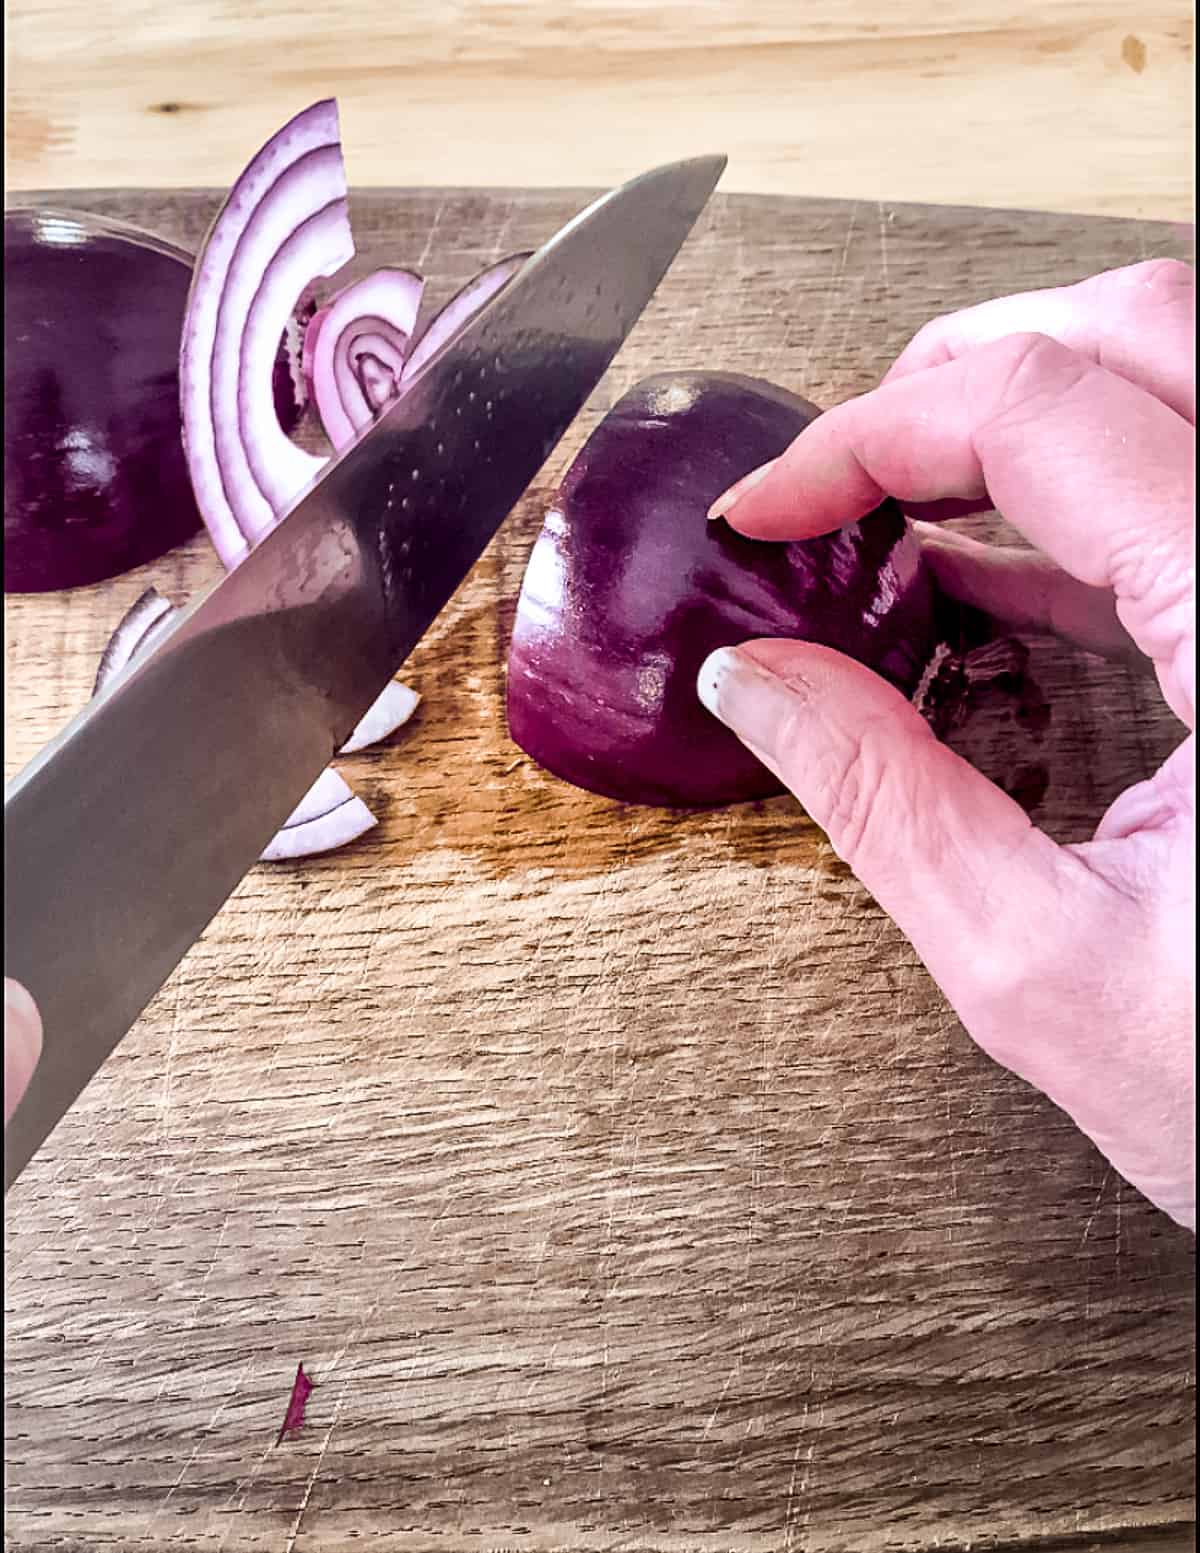 Onion being finely sliced.